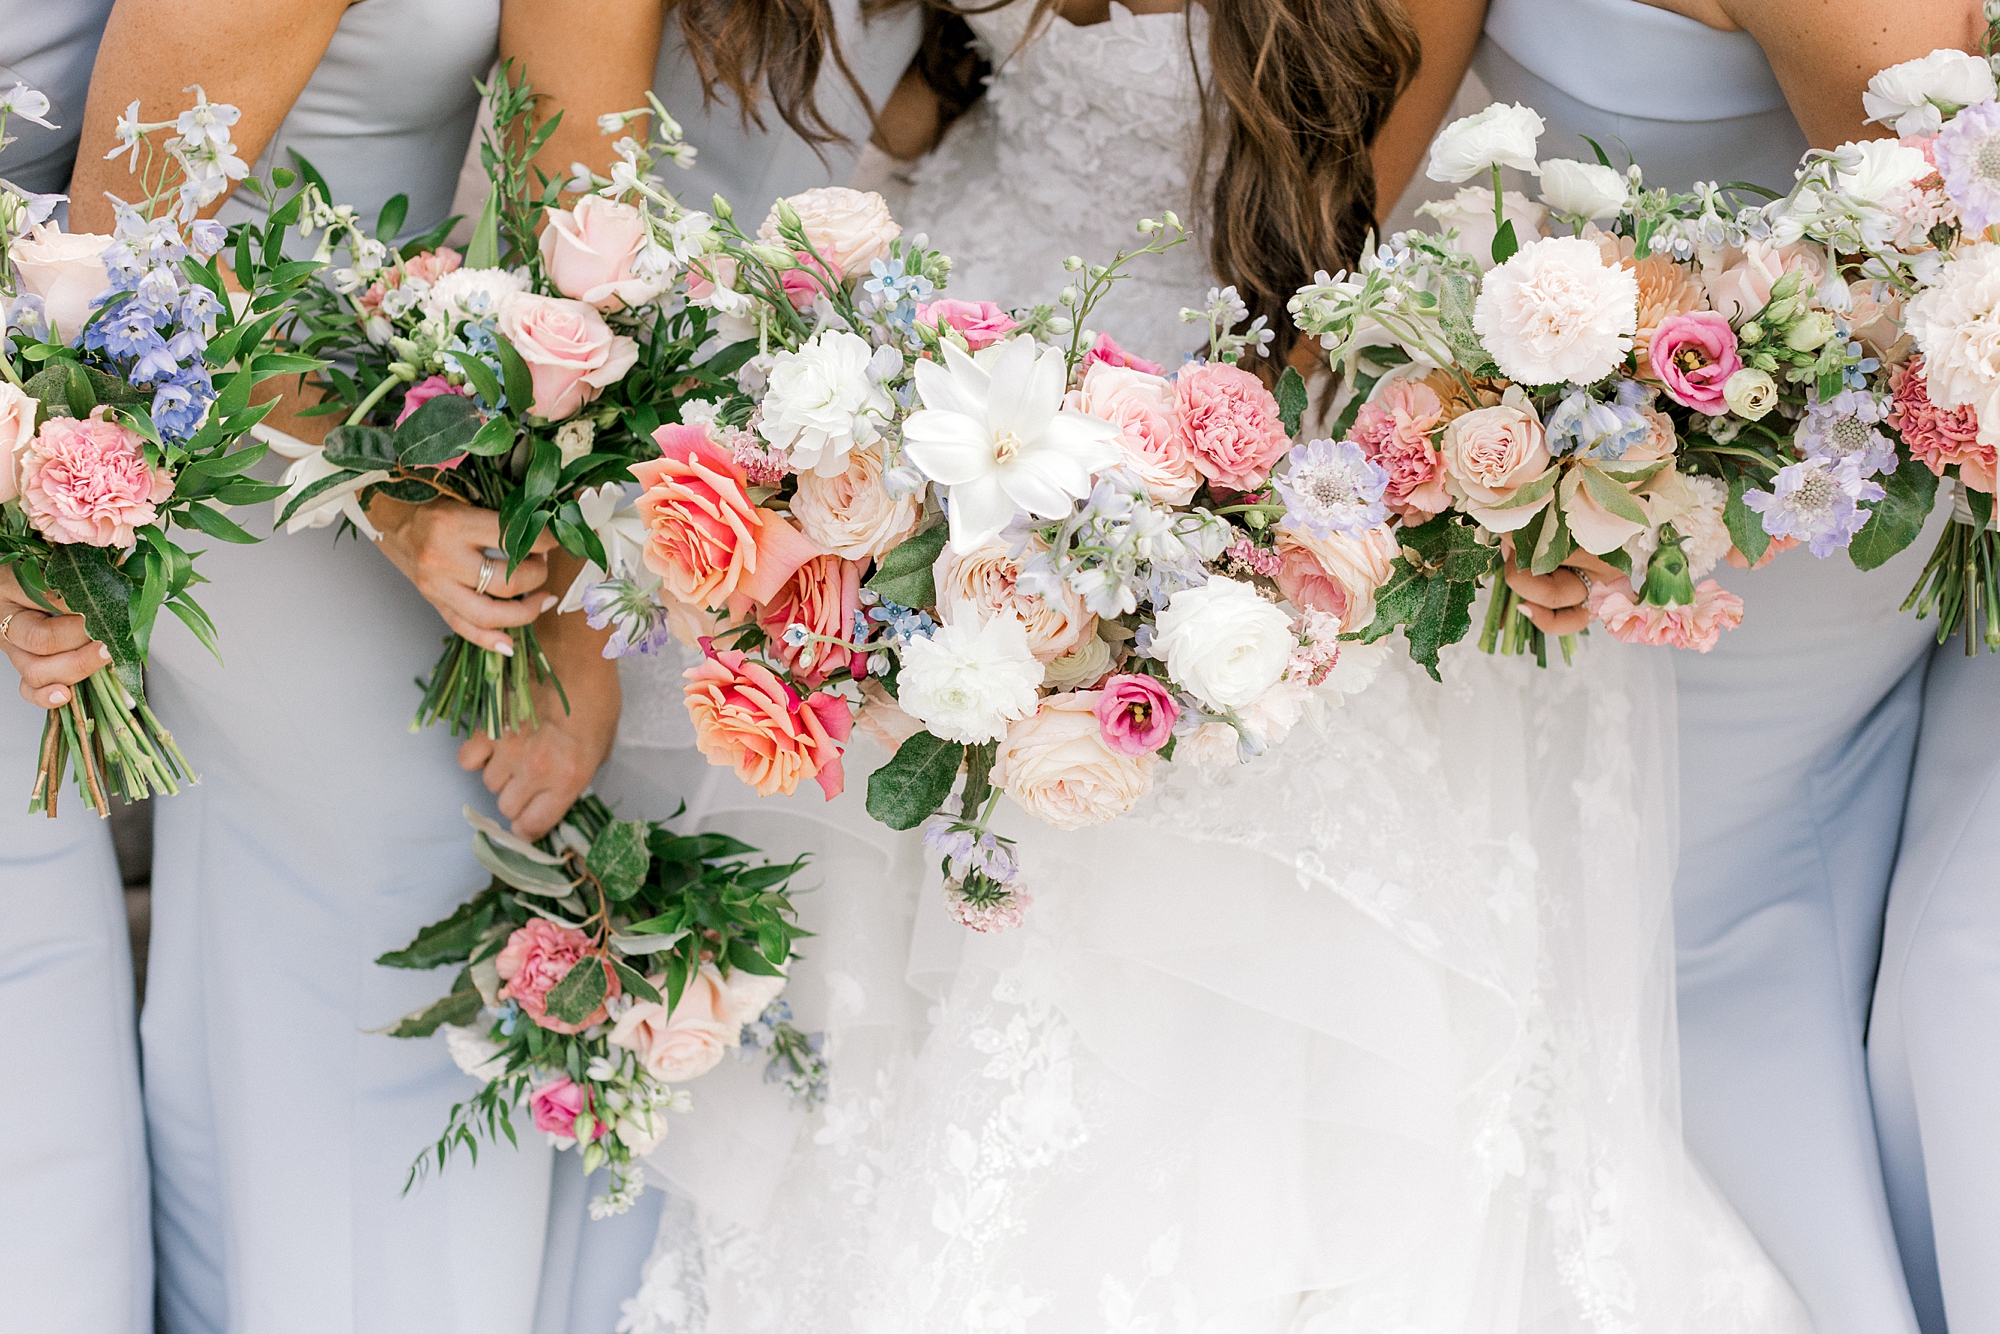 bride and bridesmaids in blue gowns hold pink and white bouquets for spring wedding